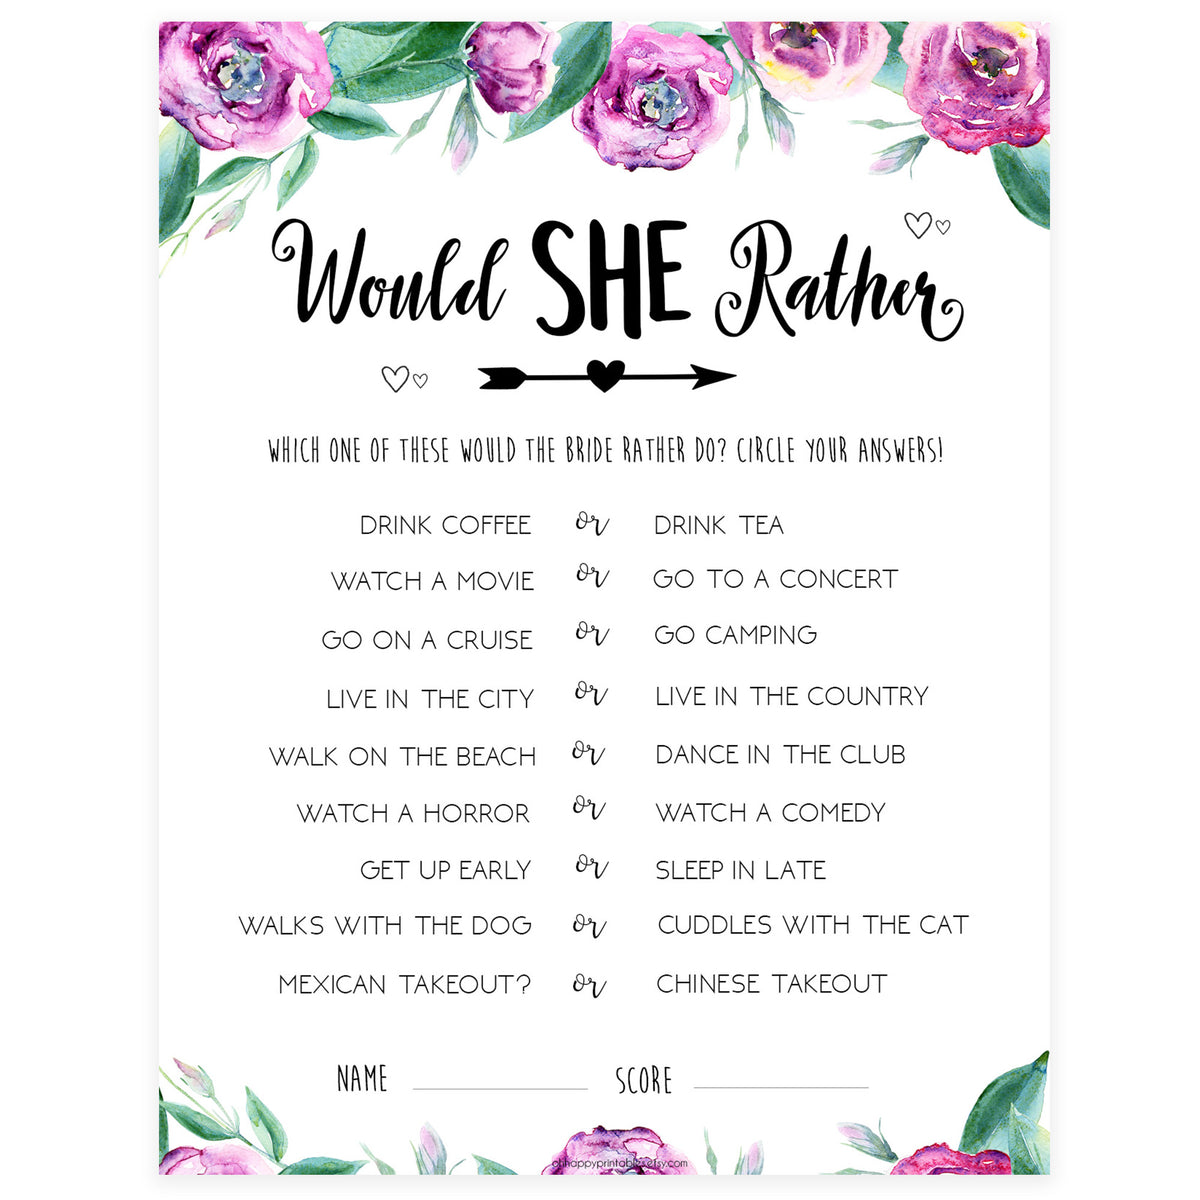 would-she-rather-bridal-shower-game-free-printable-would-she-rather